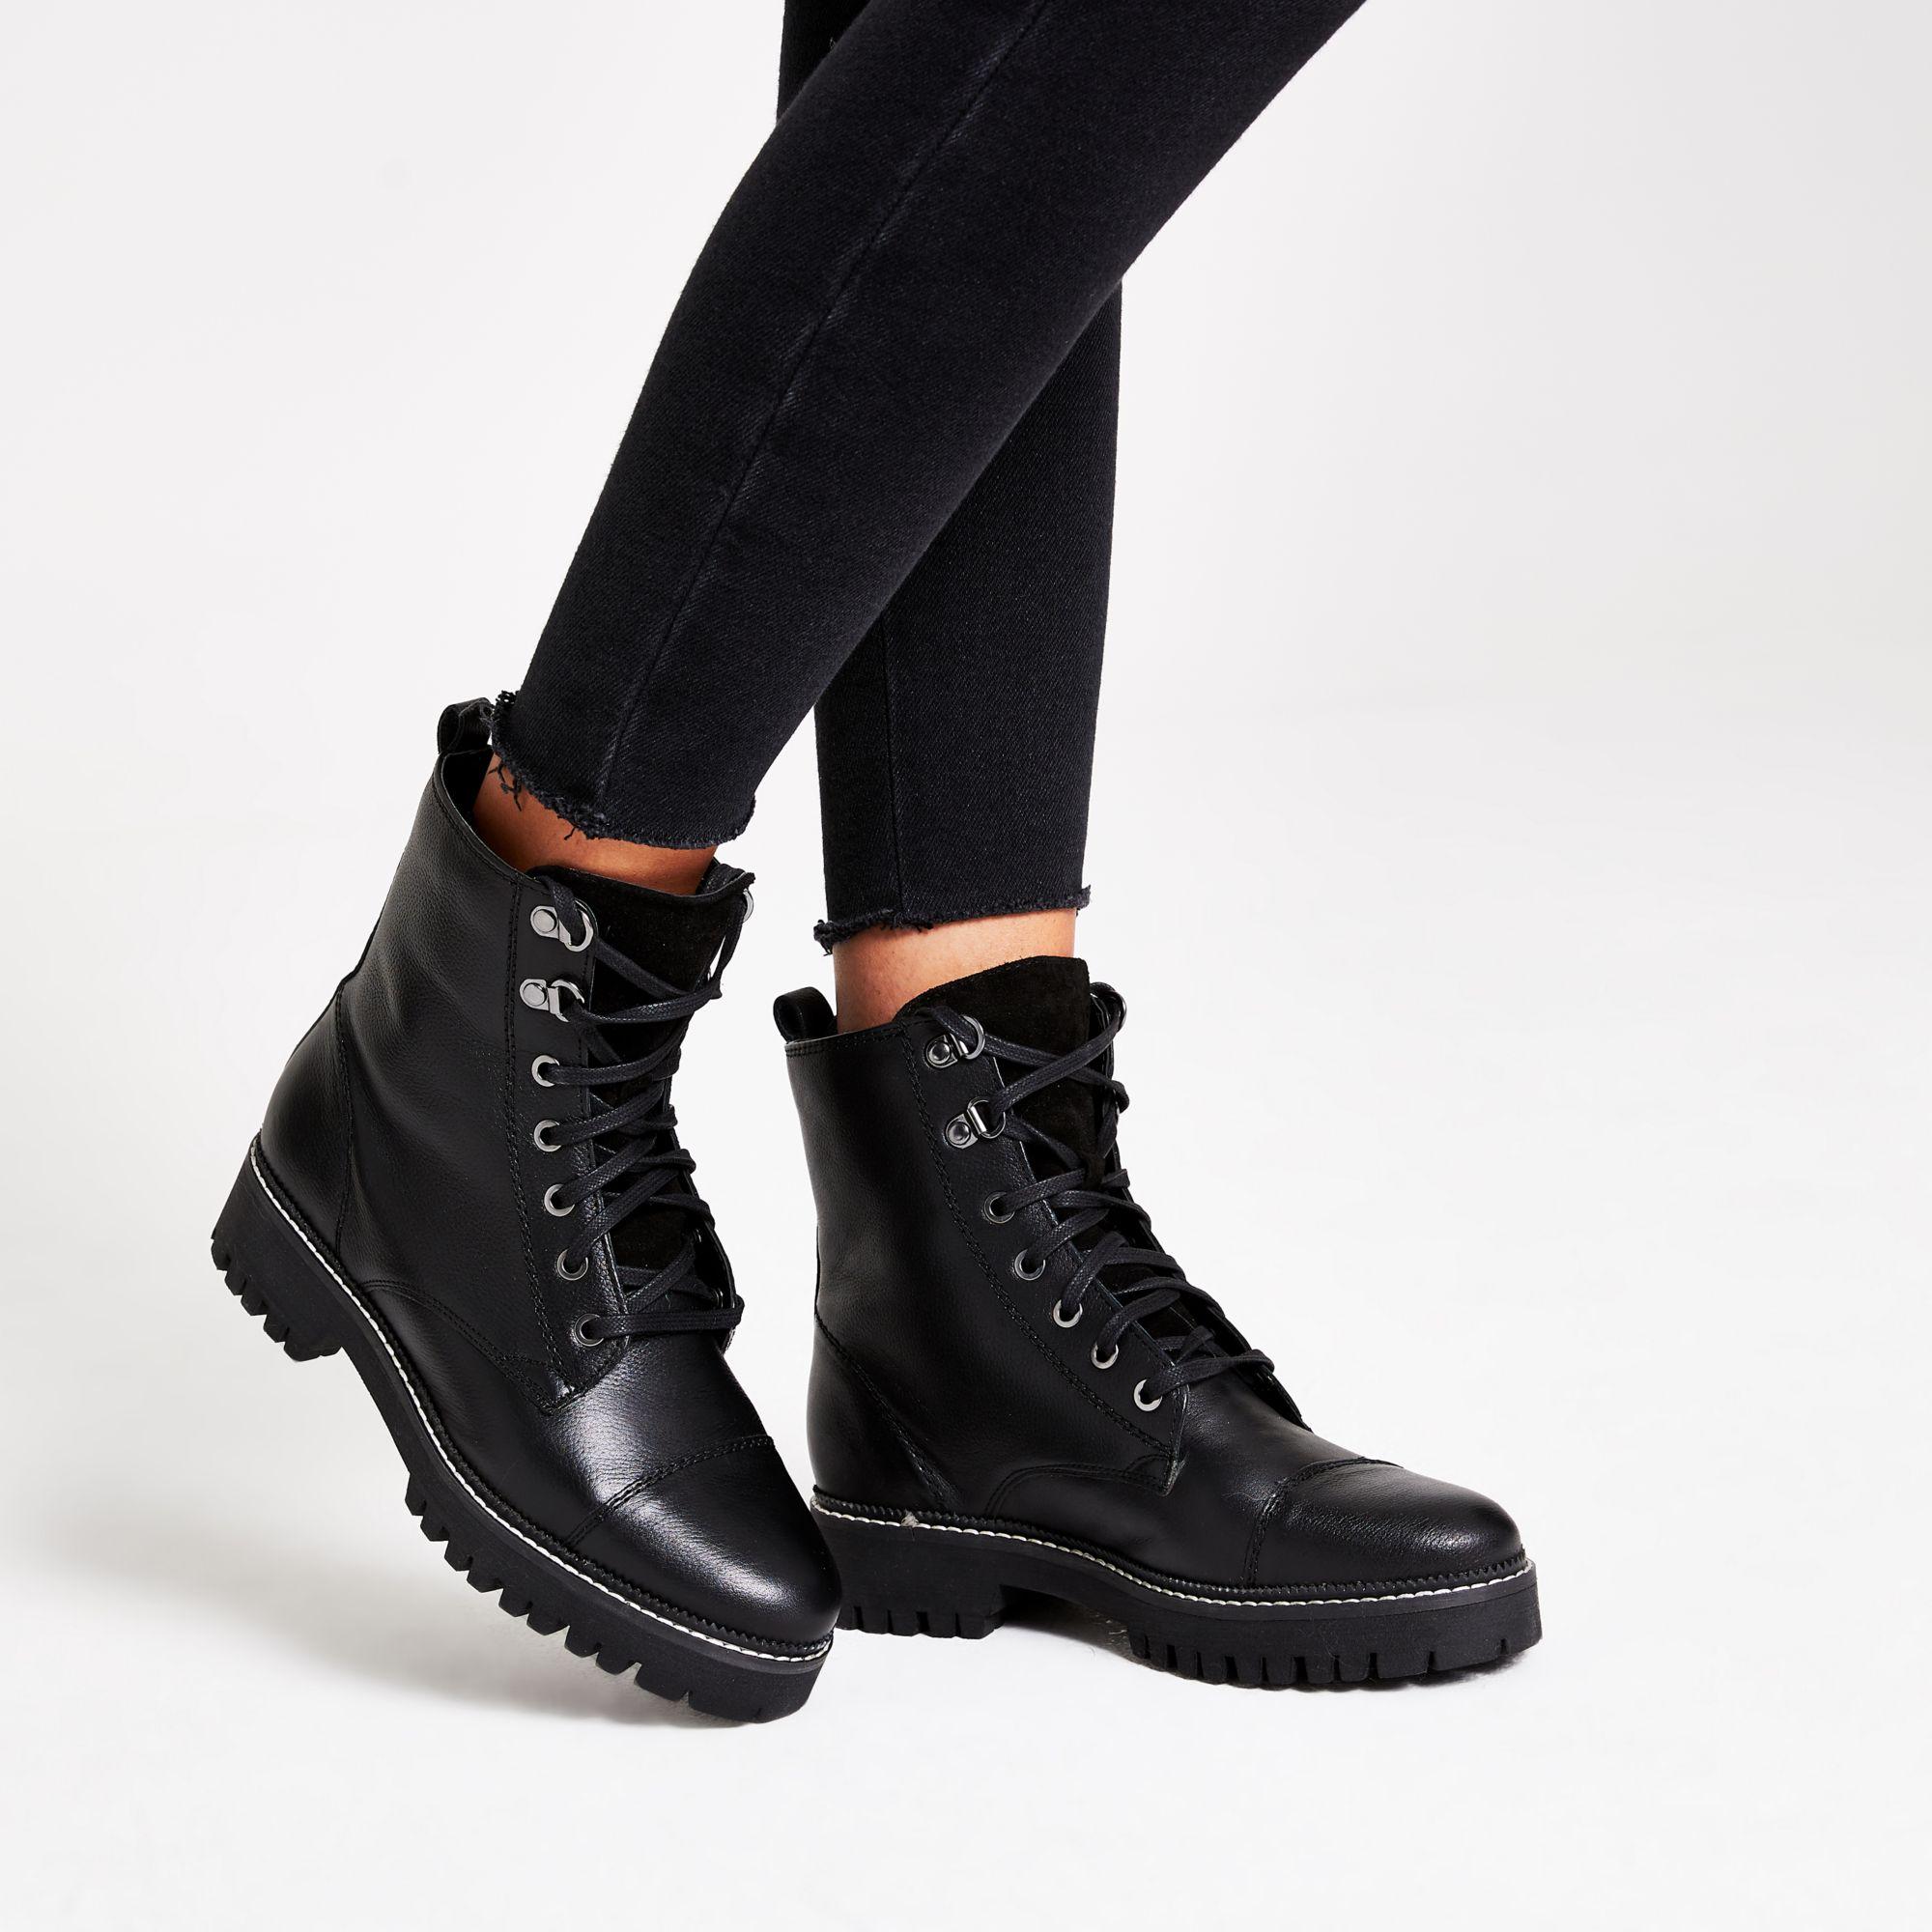 River Island Black Leather Lace-up Hiking Boots - Lyst